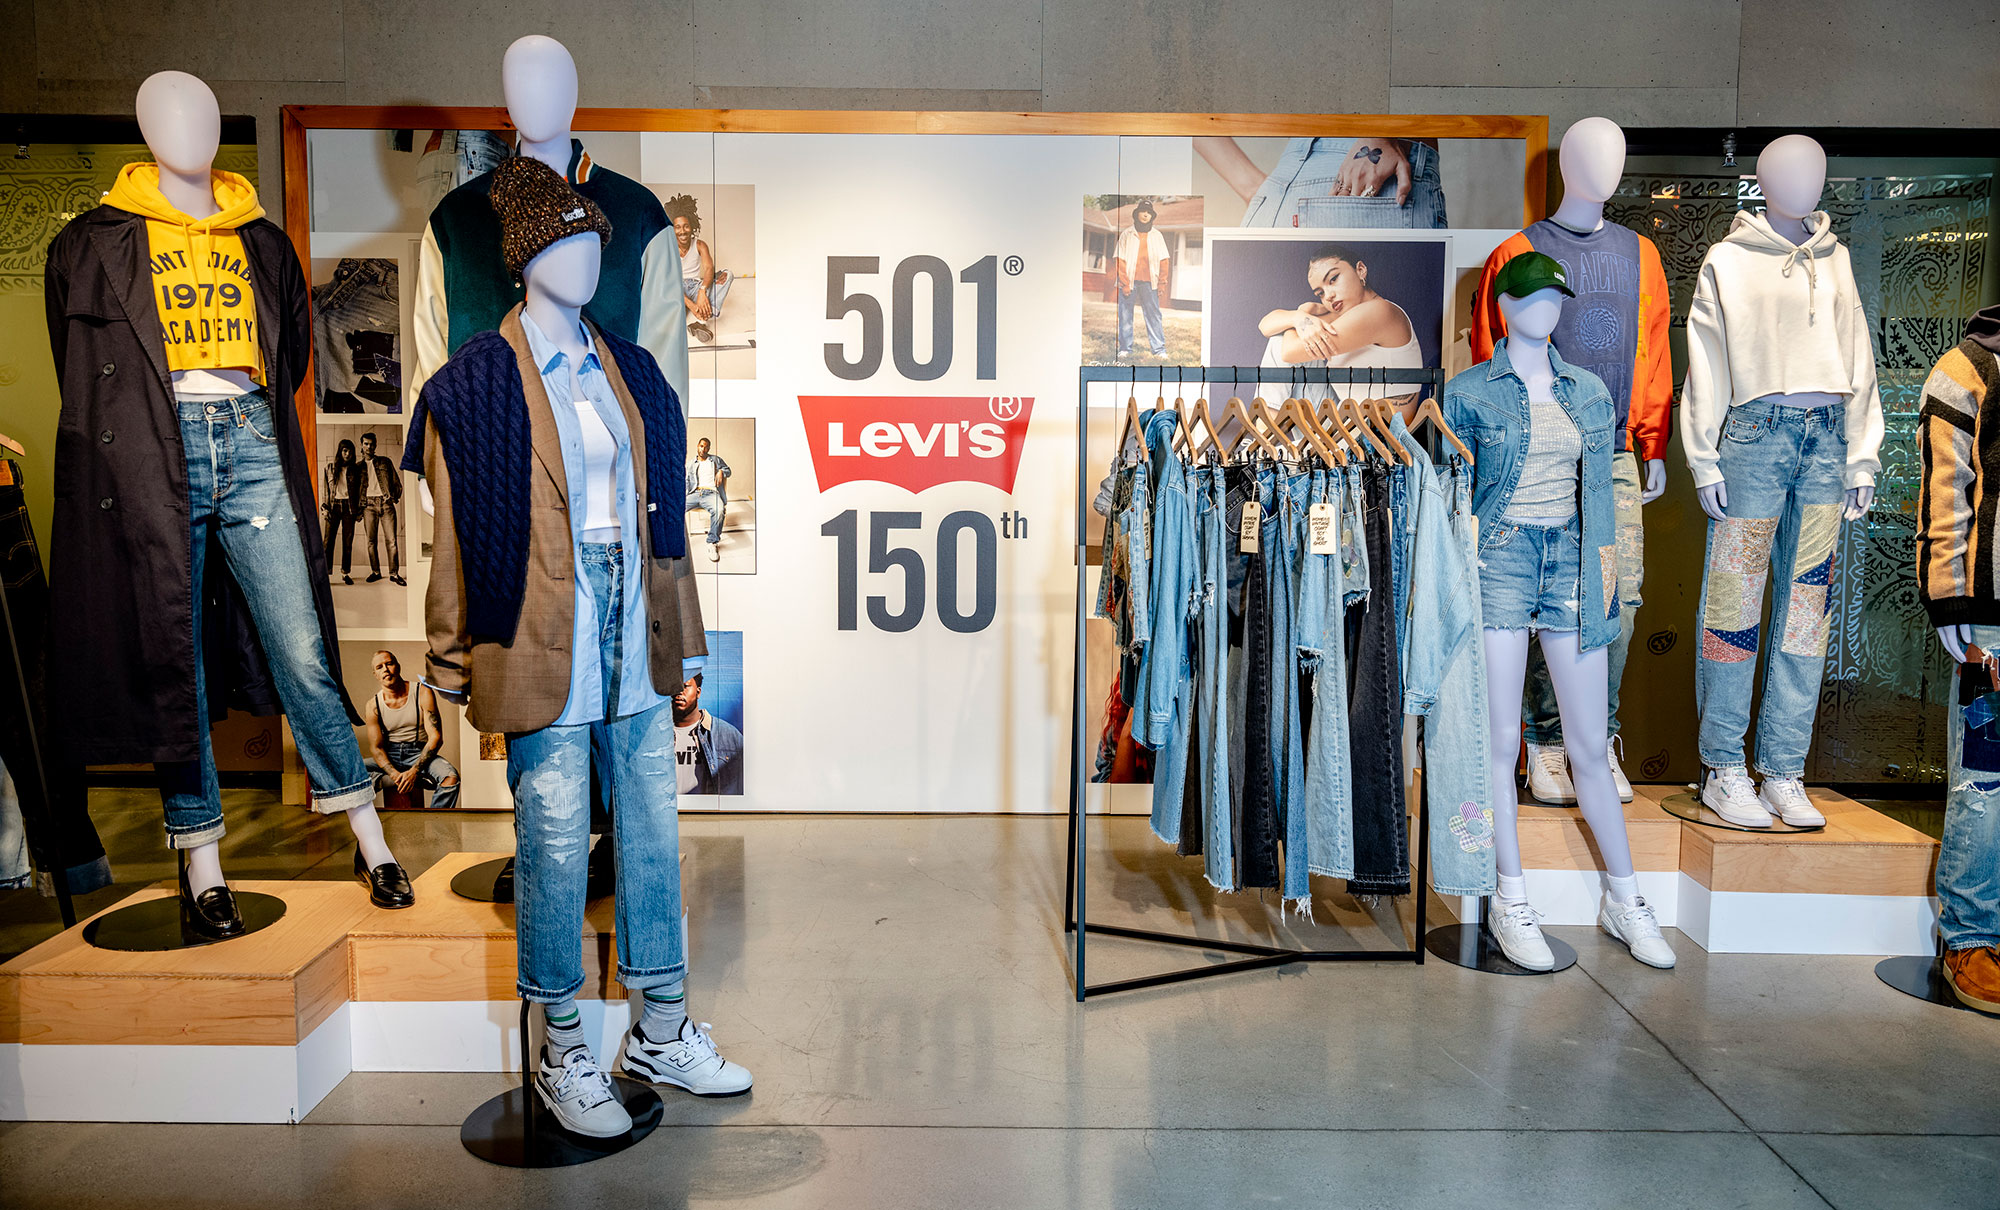 The interior of a Levi's® store showcasing mannequins and hanging displays of Levi's® 501® products. A sign reads 501® Levi's® 150th.